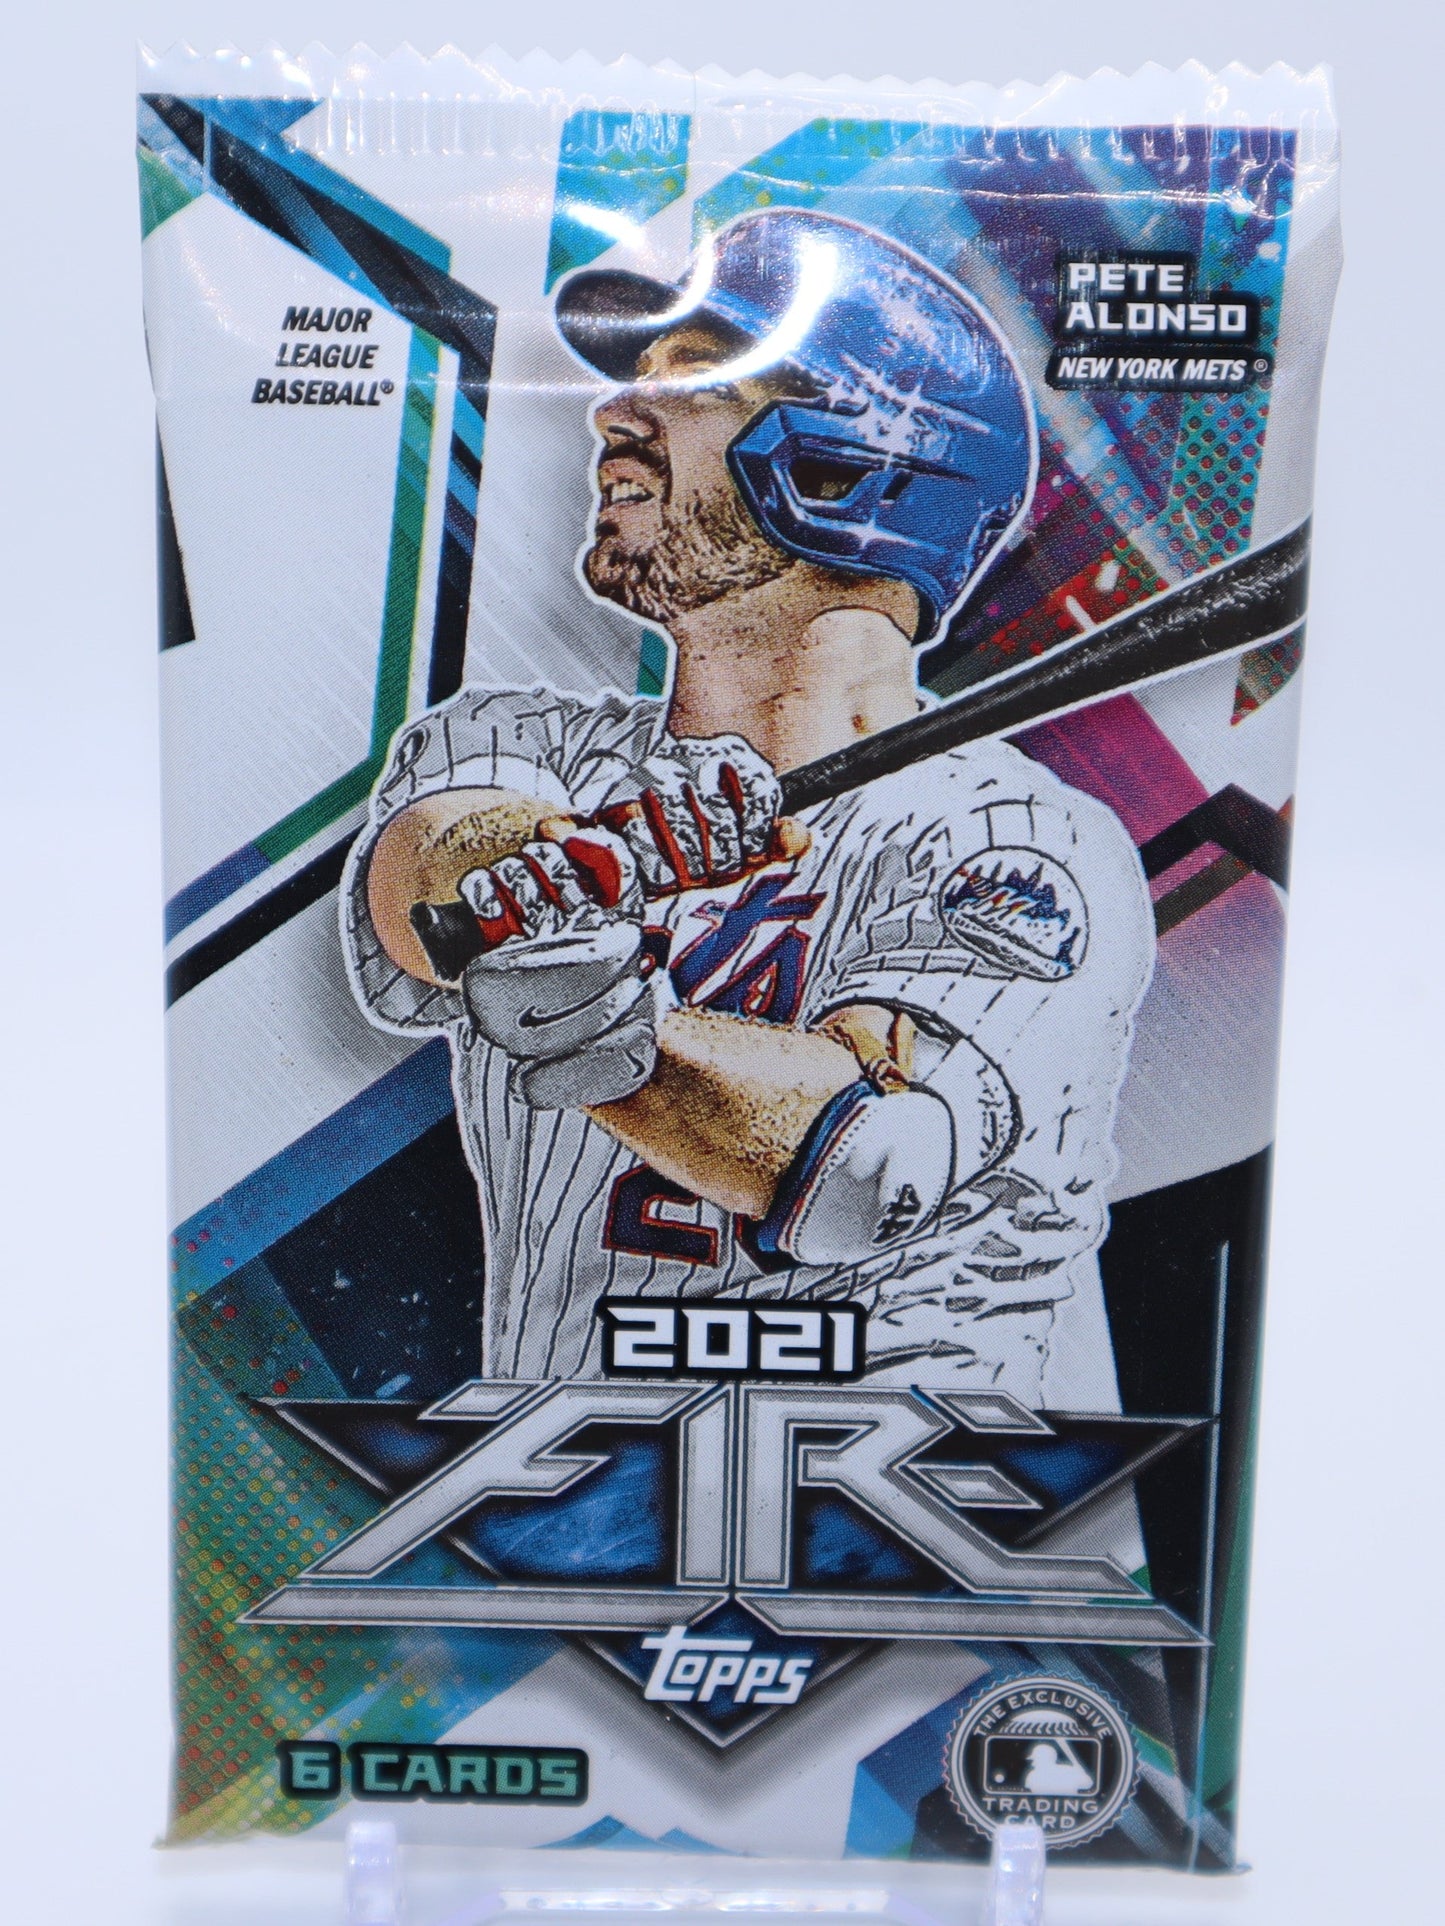 2021 Topps Fire Baseball Cards Blaster Box Wax Pack - Collectibles